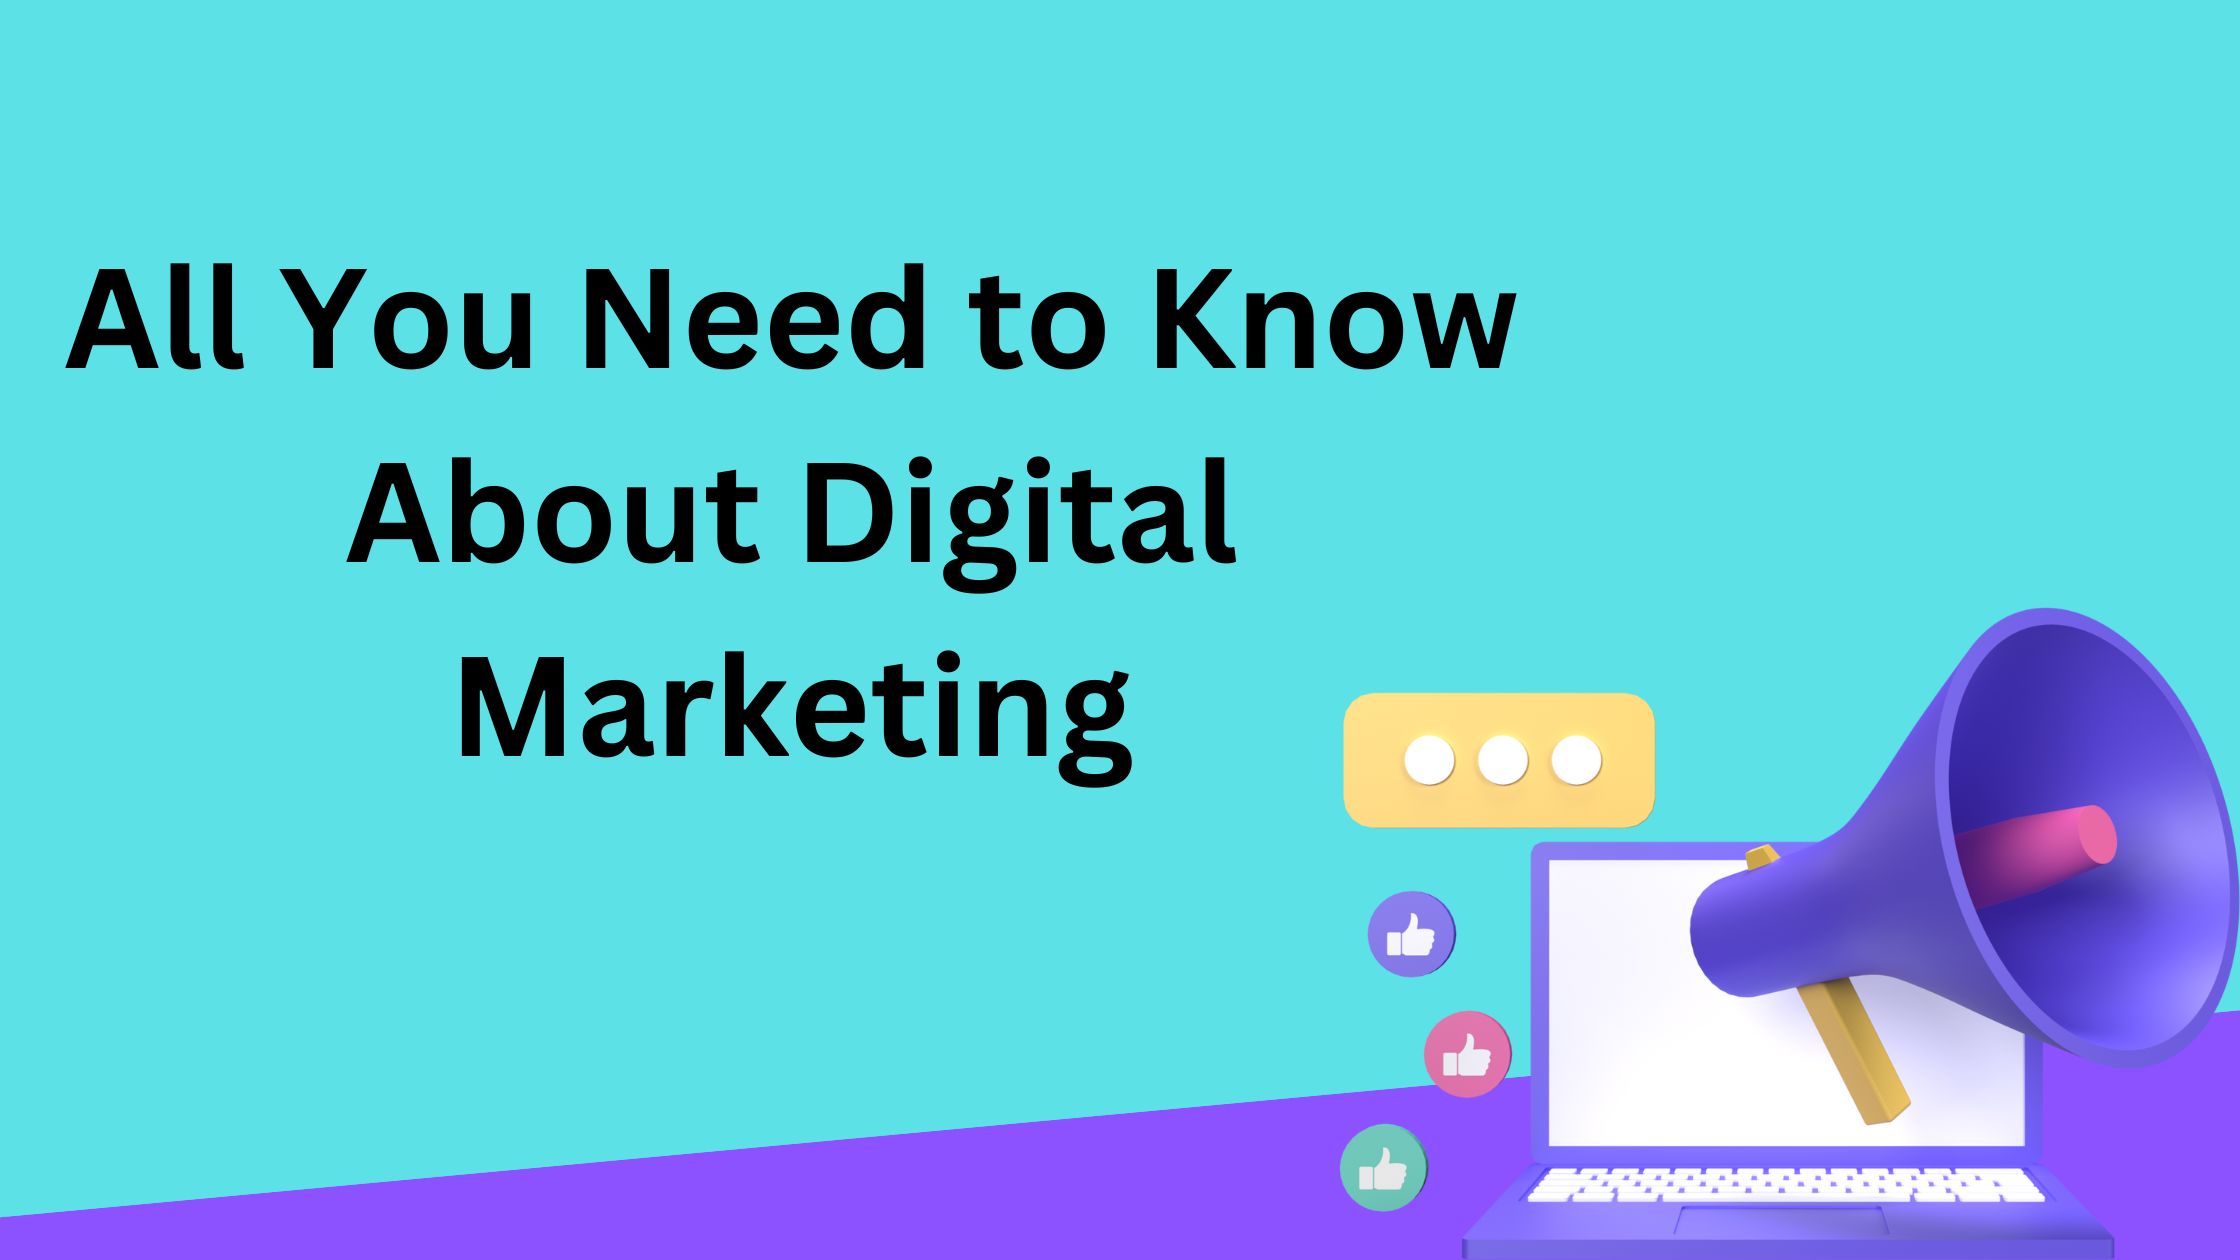 All You Need to Know About Digital Marketing